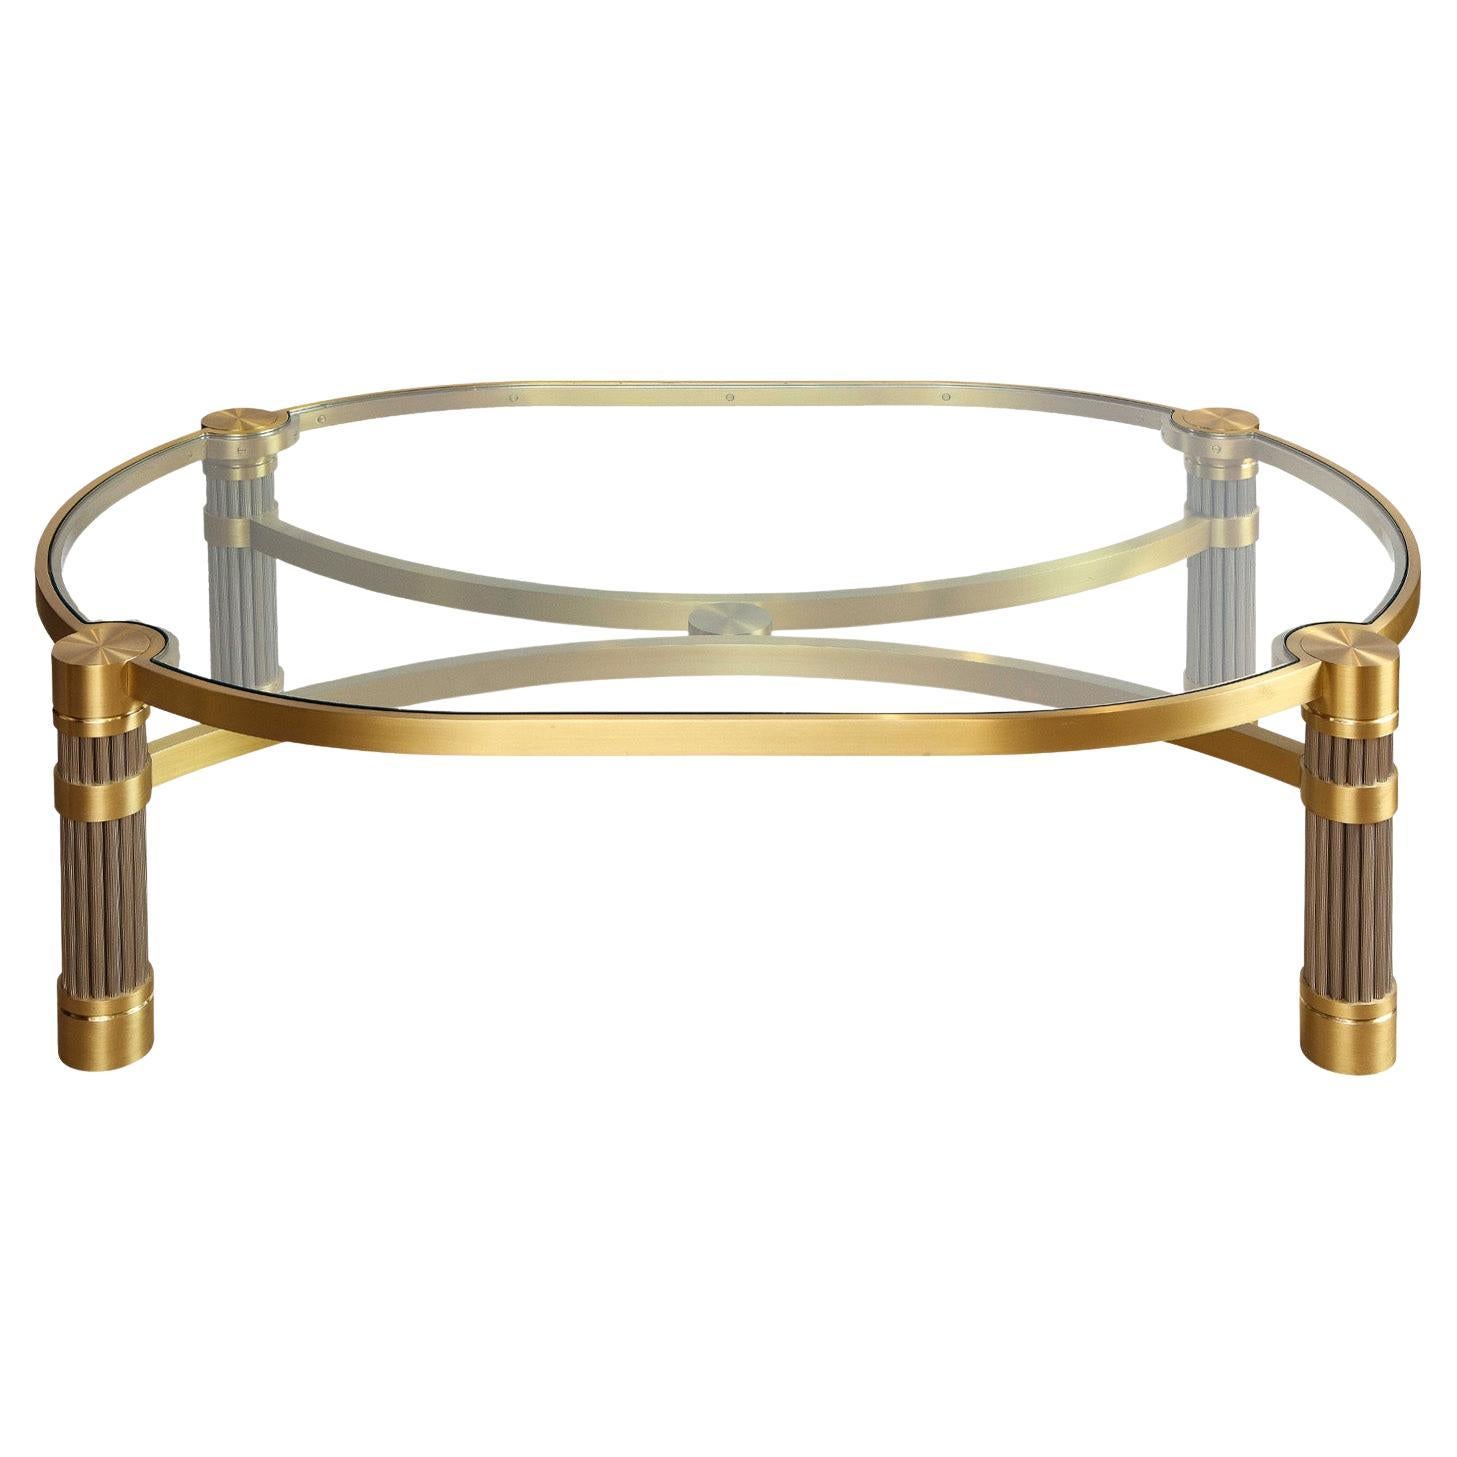 Ron Seff Large Coffee Table in Brushed Stainless Steel and Brass, 1980s